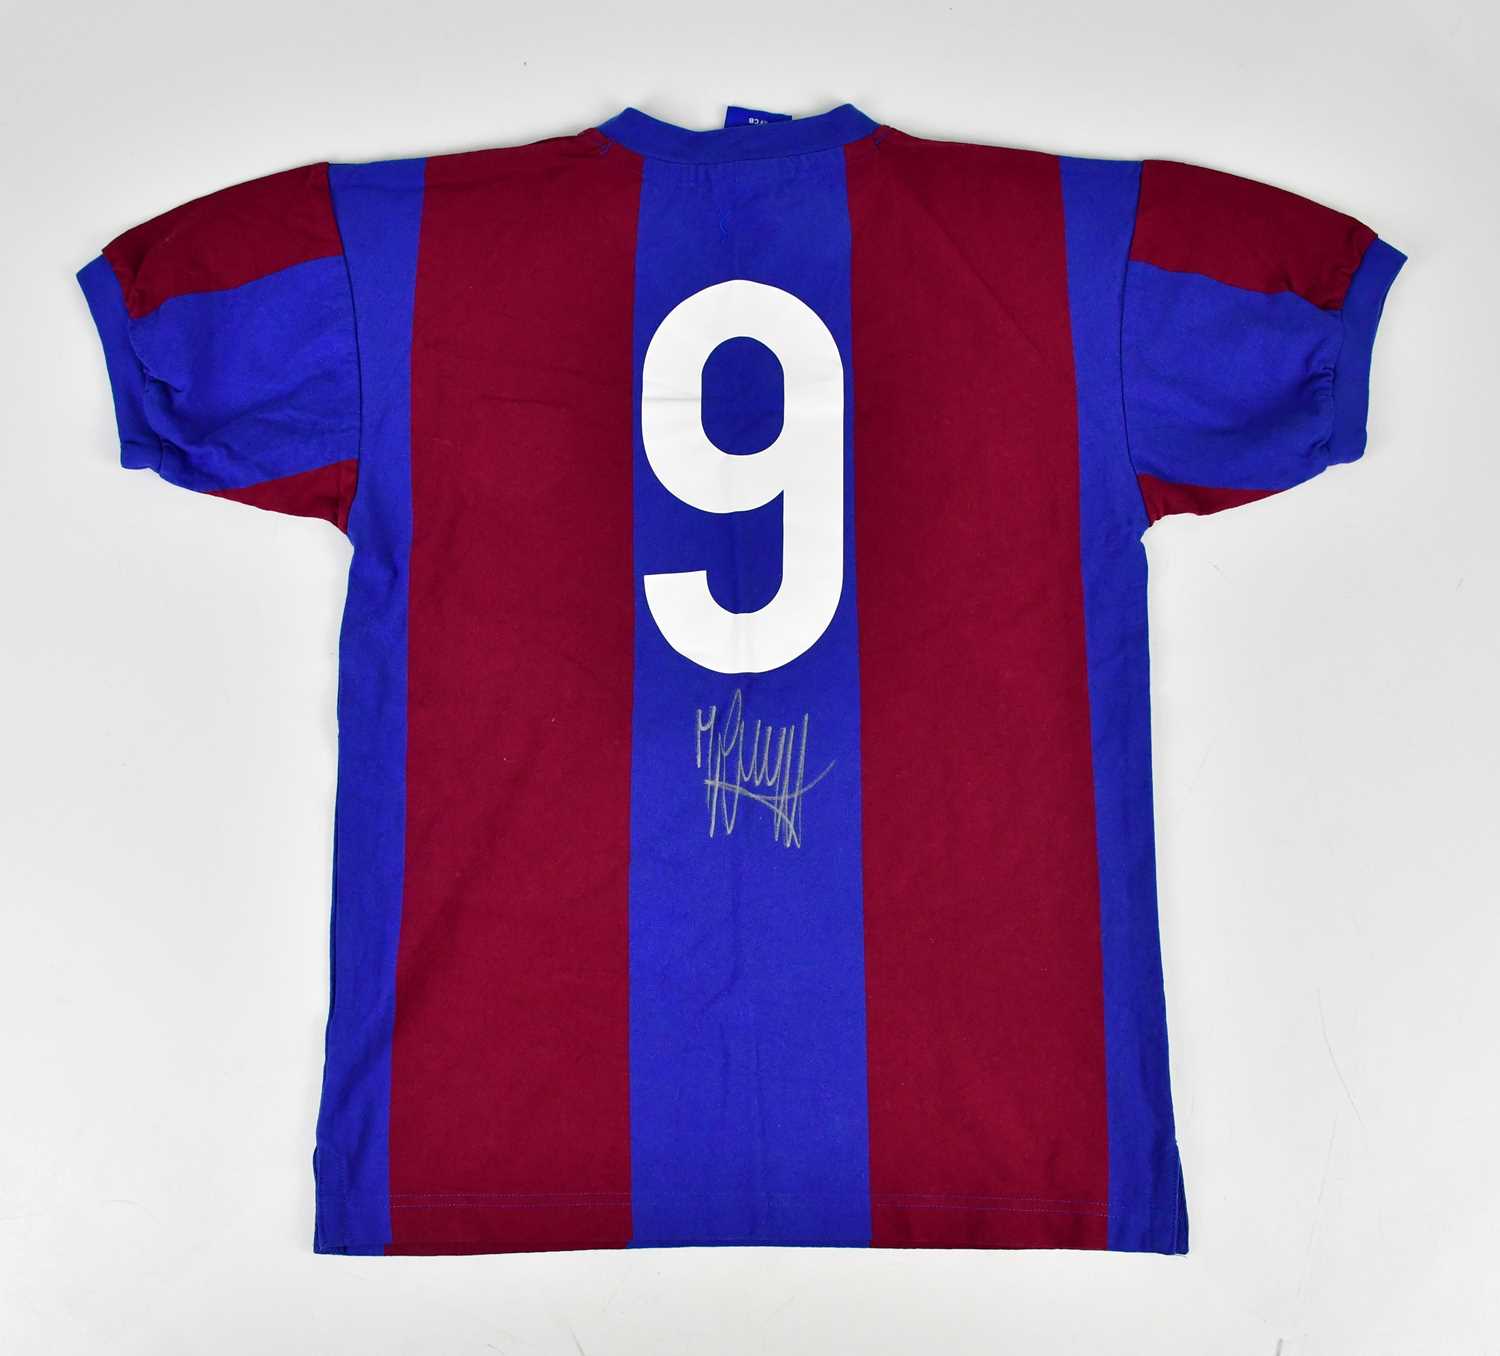 JOHANN CRUYFF; a signed retro style Barcelona football shirt, signed to the reverse, size S. - Image 2 of 3